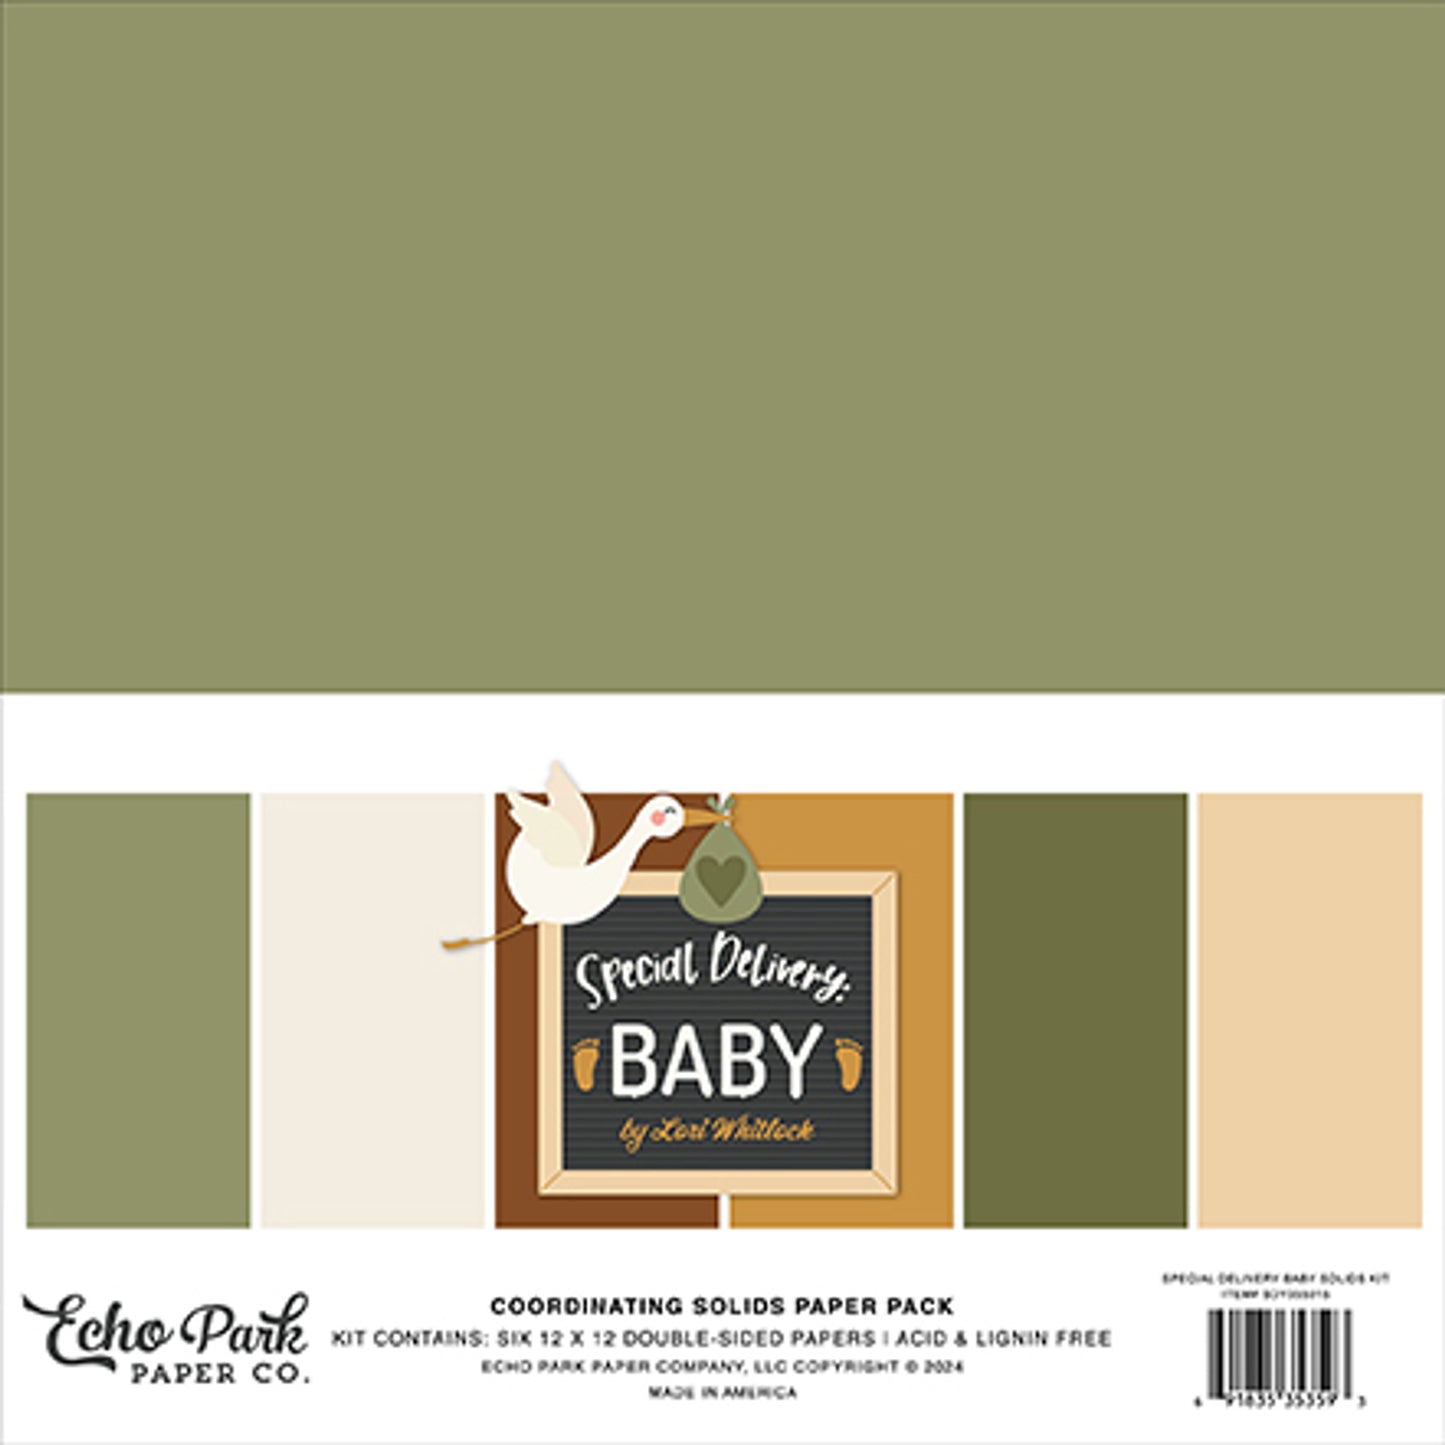 Special Delivery Baby . Coordinating Solids Pack